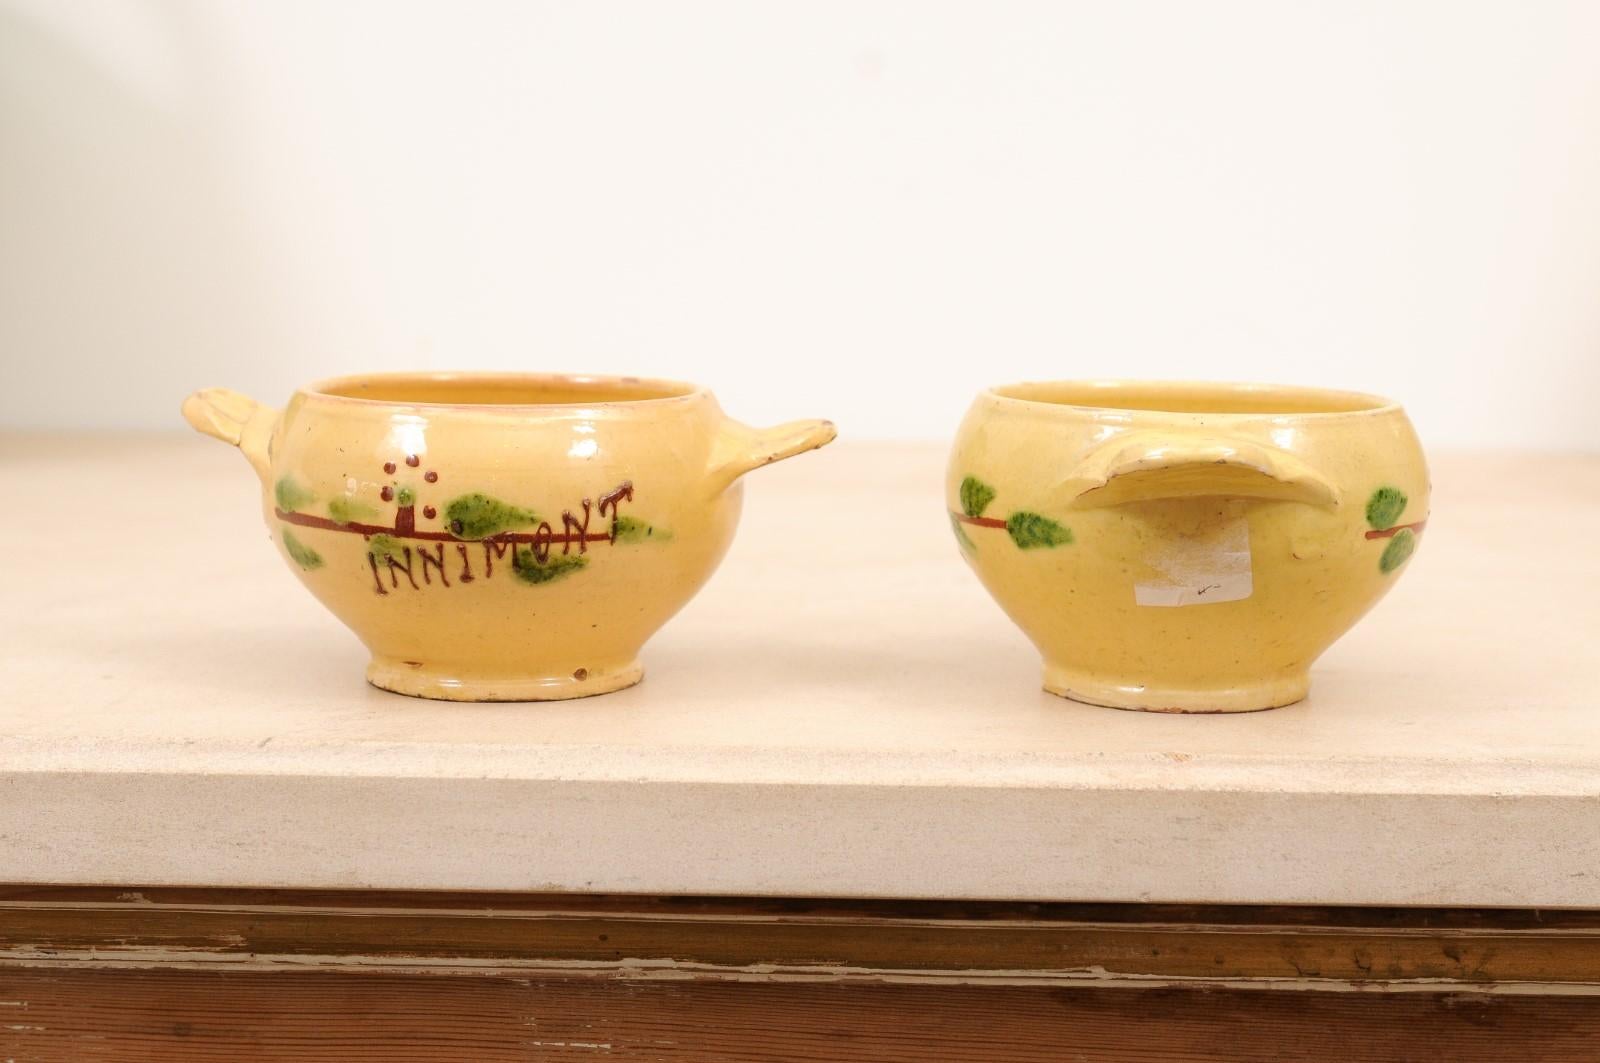 Petite 19th Century Eastern French Yellow Glazed Pottery Bowls from Innimont For Sale 5